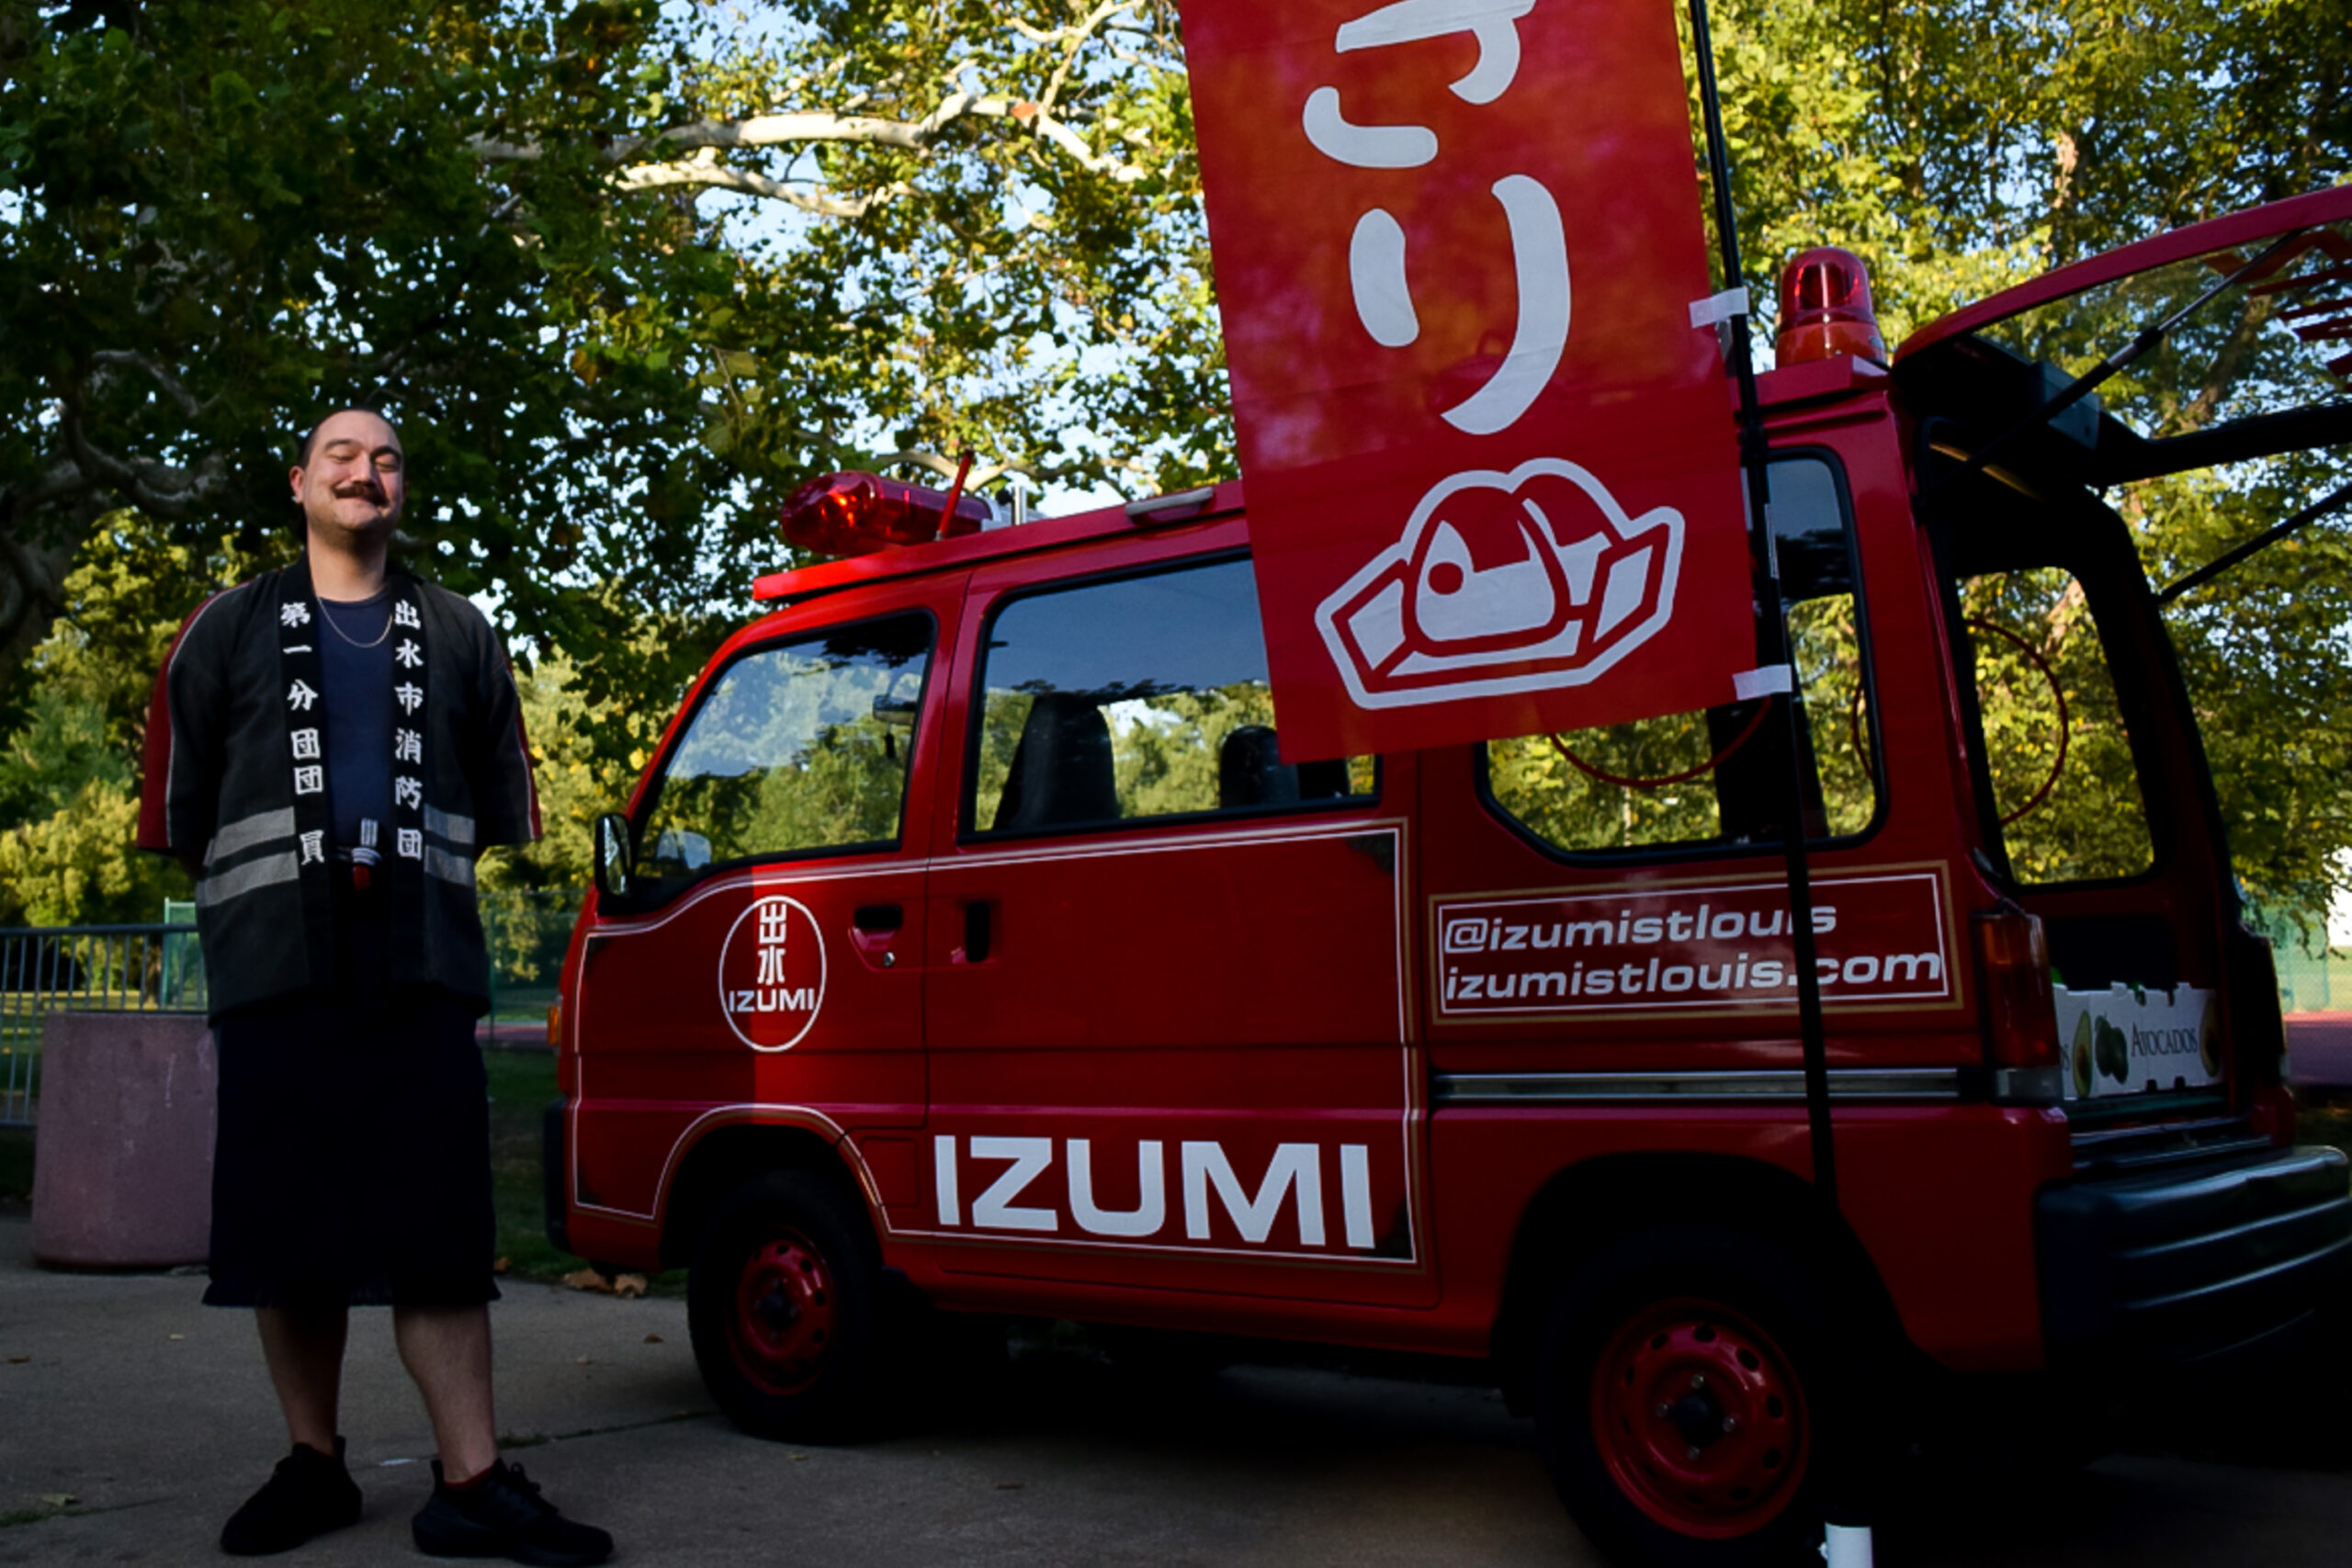 A middle aged fair-skinned man stands next to a Japanese fire truck in a park.